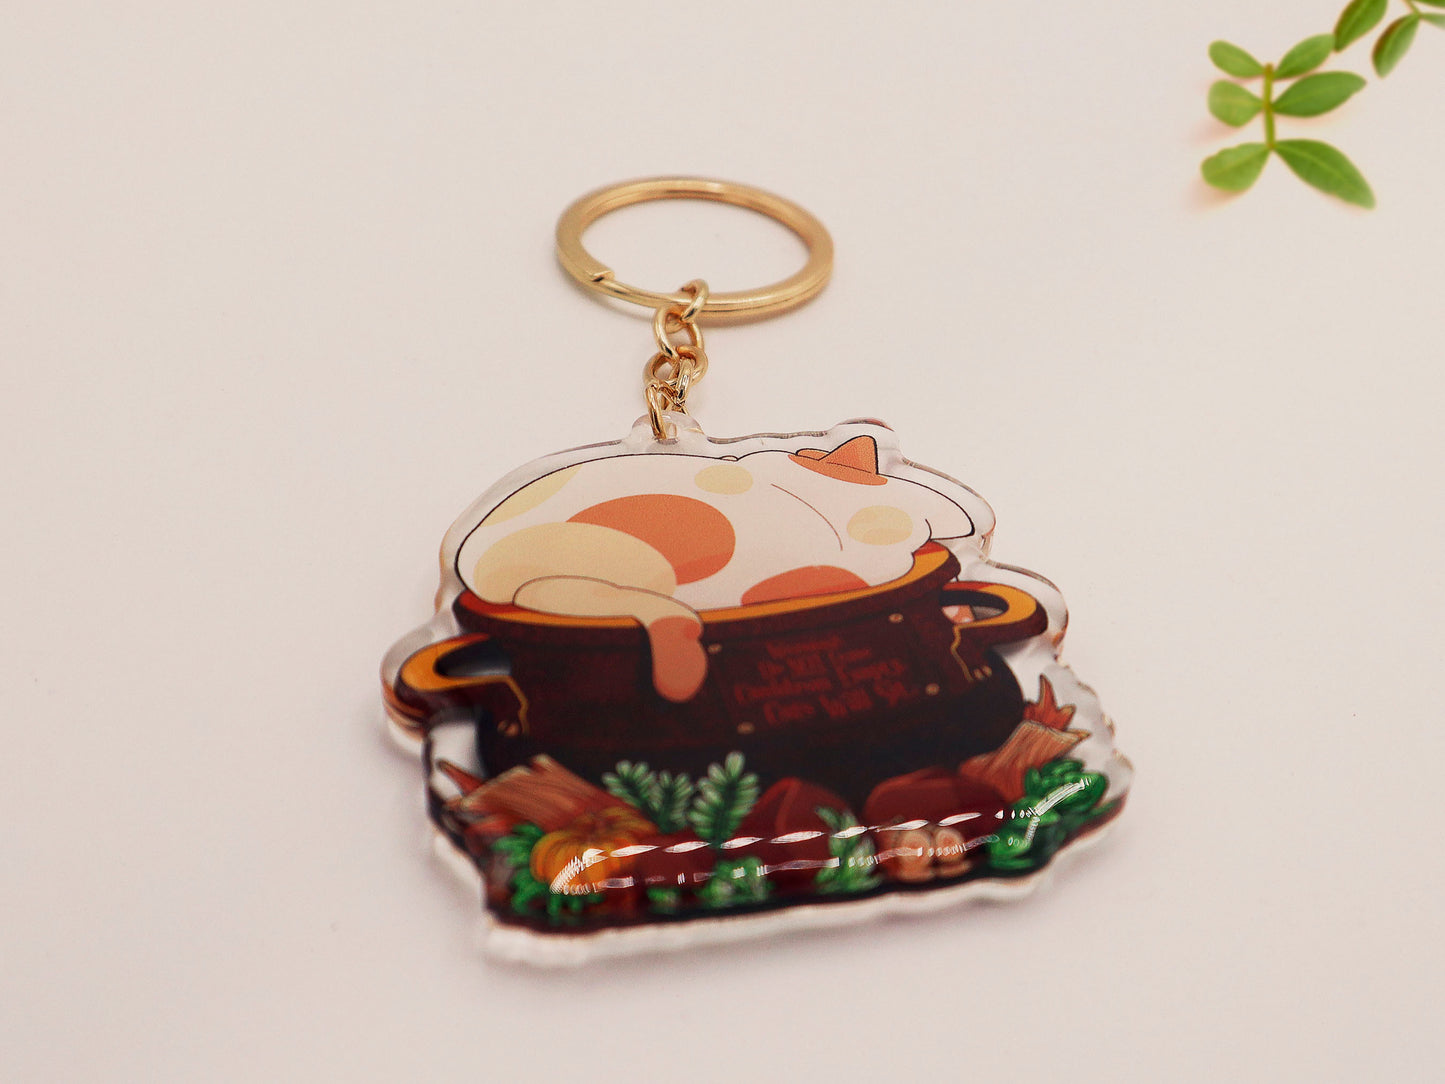 Double sided epoxy clear acrylic keychain with golden clasp of a fat calico cat sat happily inside a witches cauldron surrounded by plants and pumpkins.